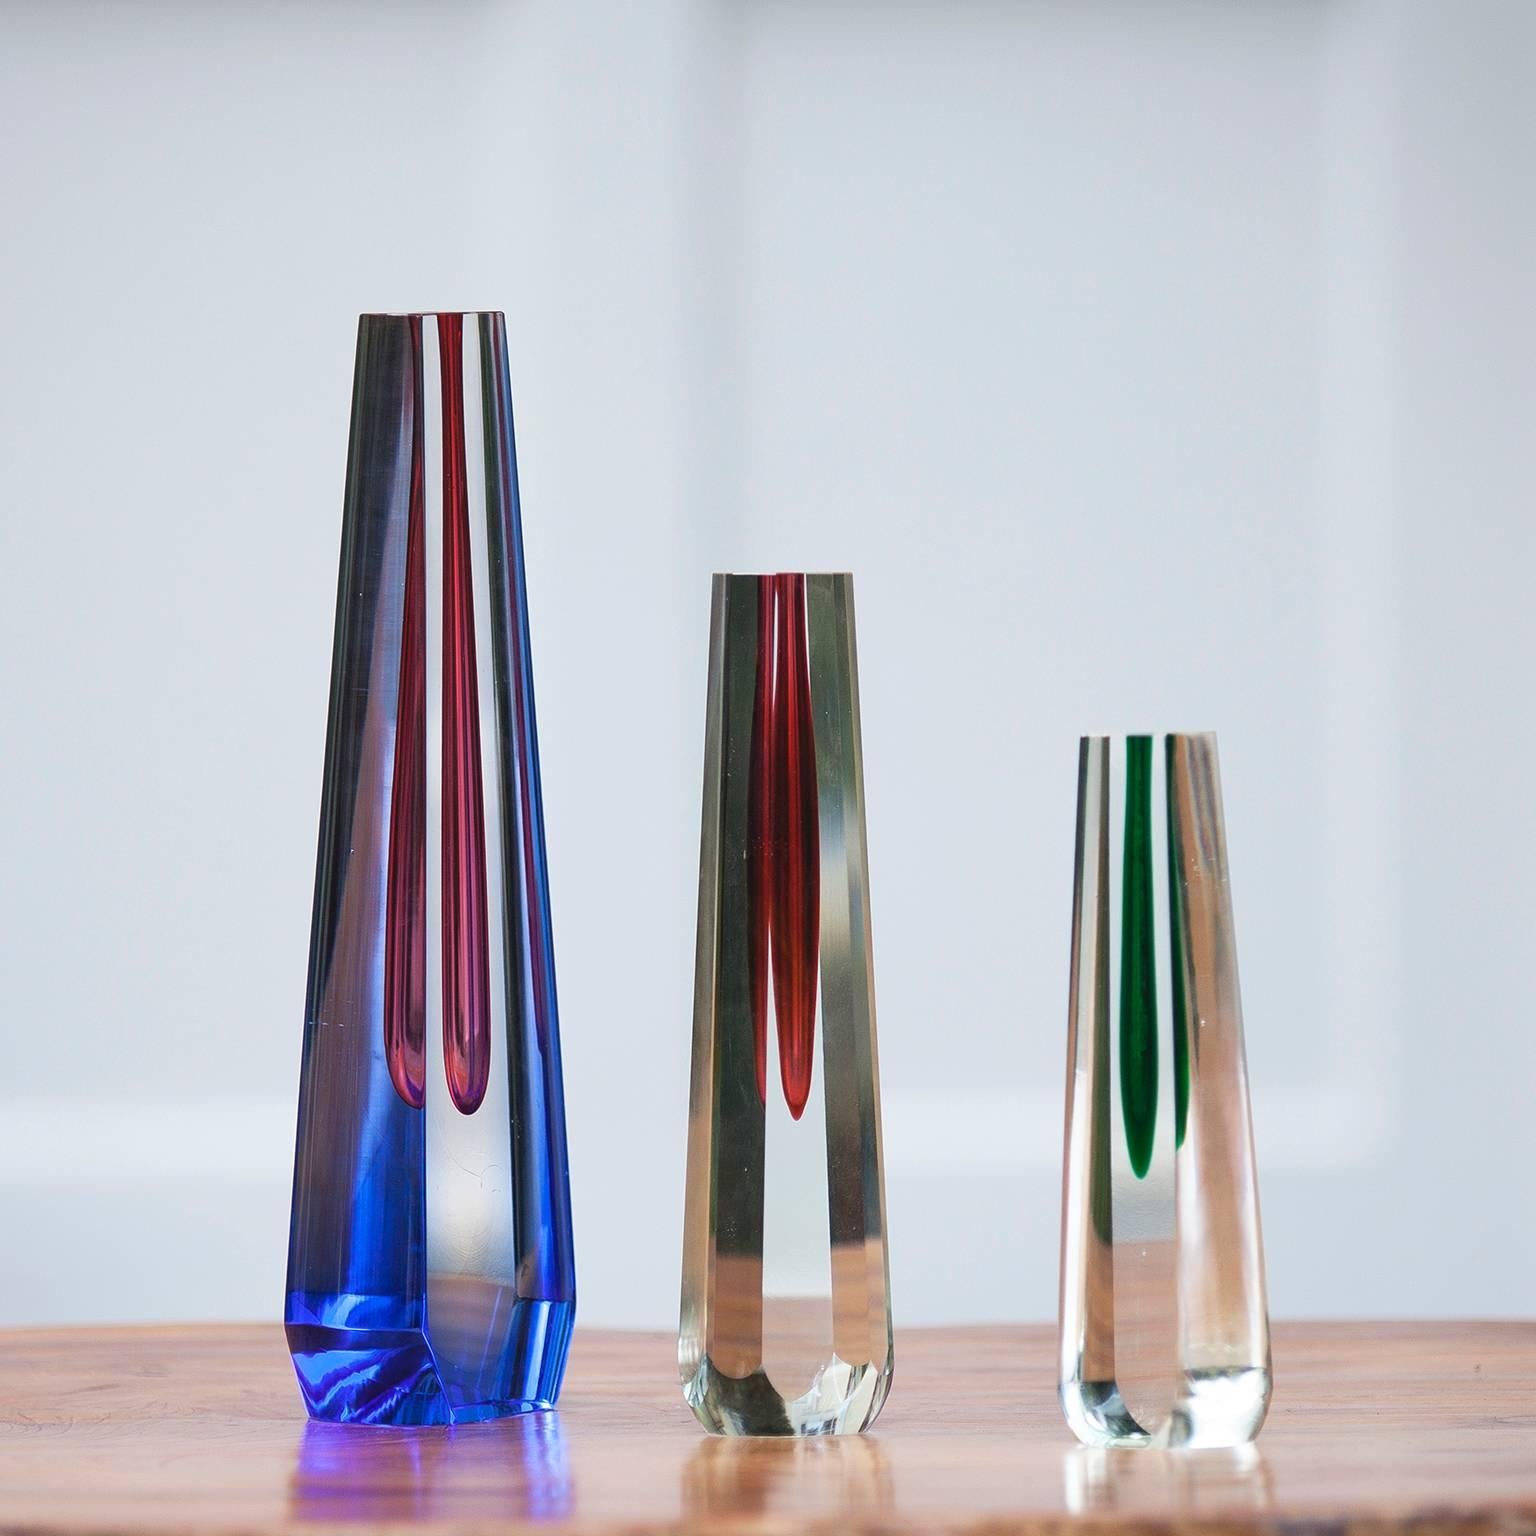 Set of three sculptural glass vases by Pavel Hlava, Czech, 1960. A deep blue, red and green teardrop is suspended in a clear glass form. The inner tubular core can be used as a vase, but this is more of a sculpture.

Measures: Blue 31 x 9 x 5.2